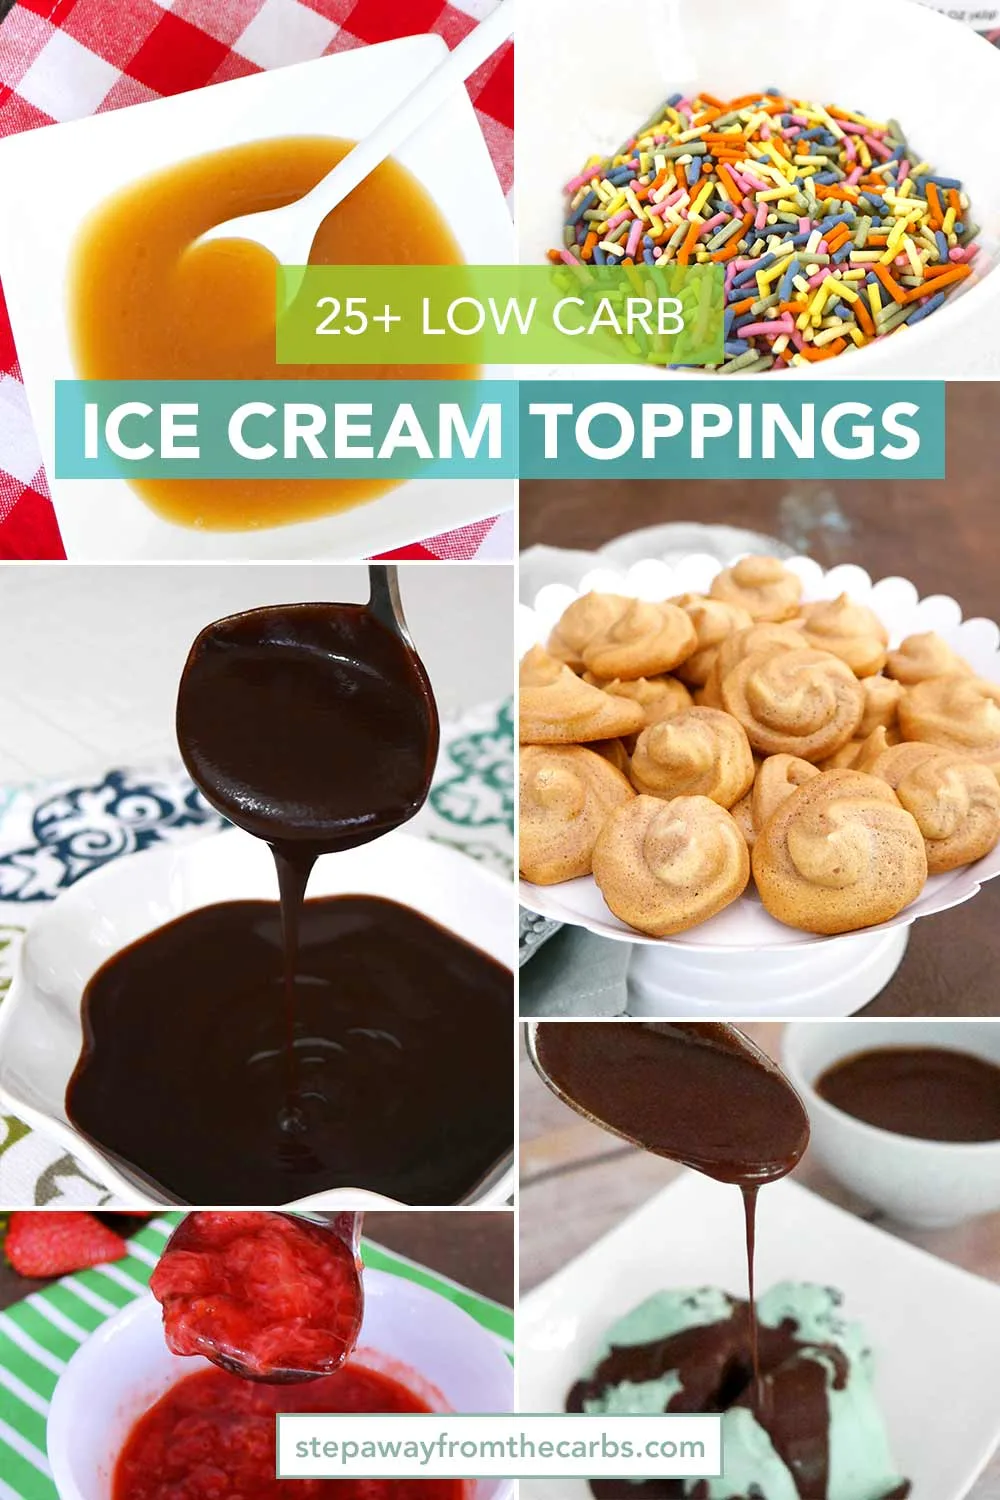 25+ Low Carb Ice Cream Toppings - treat yourself without breaking your diet!